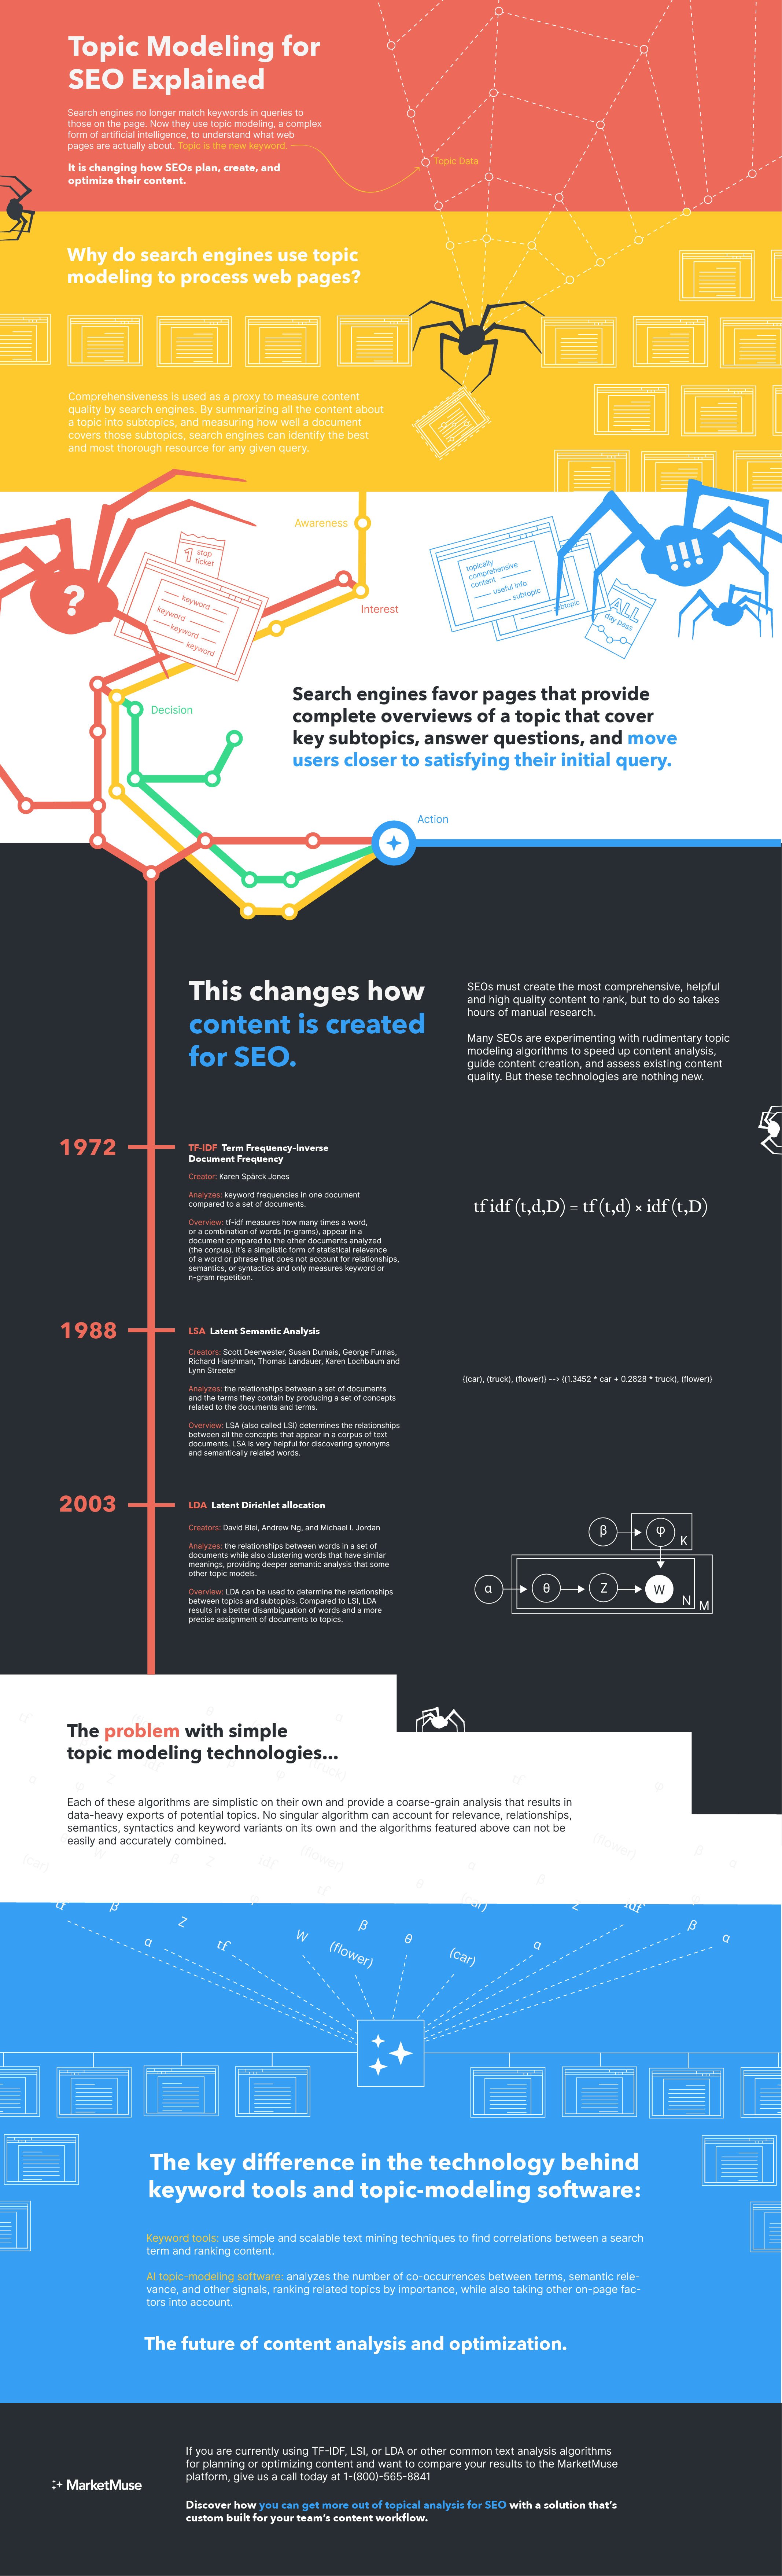 Topic Modeling For SEO Infographic